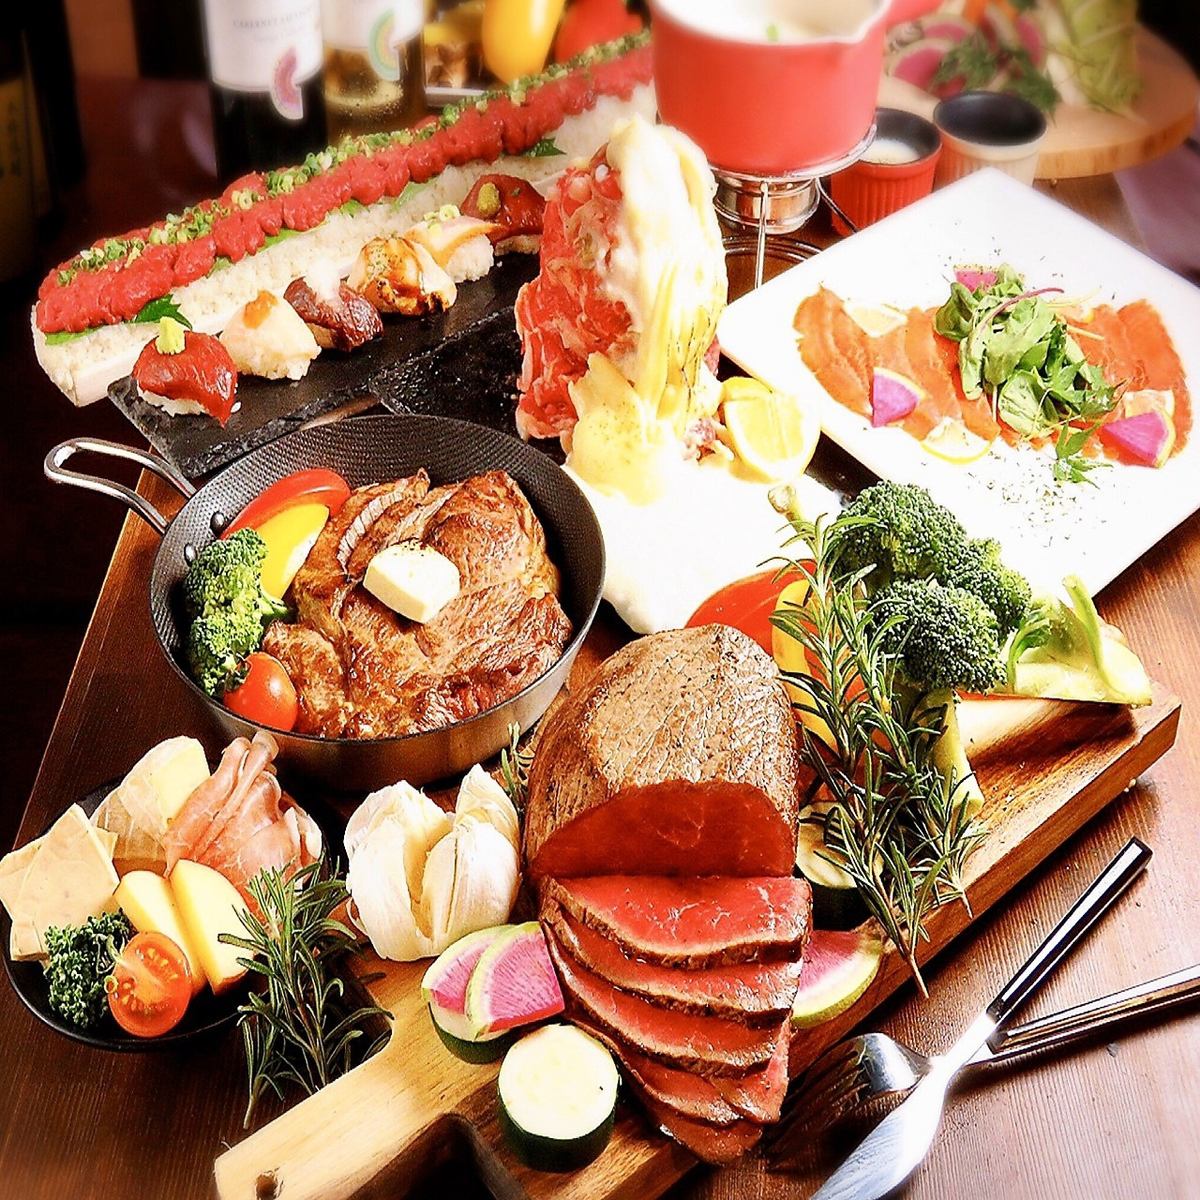 "All-you-can-eat and drink plan with 100 kinds of meat sushi + meat bar dishes" 3 hours 4000 ⇒ 3000 yen